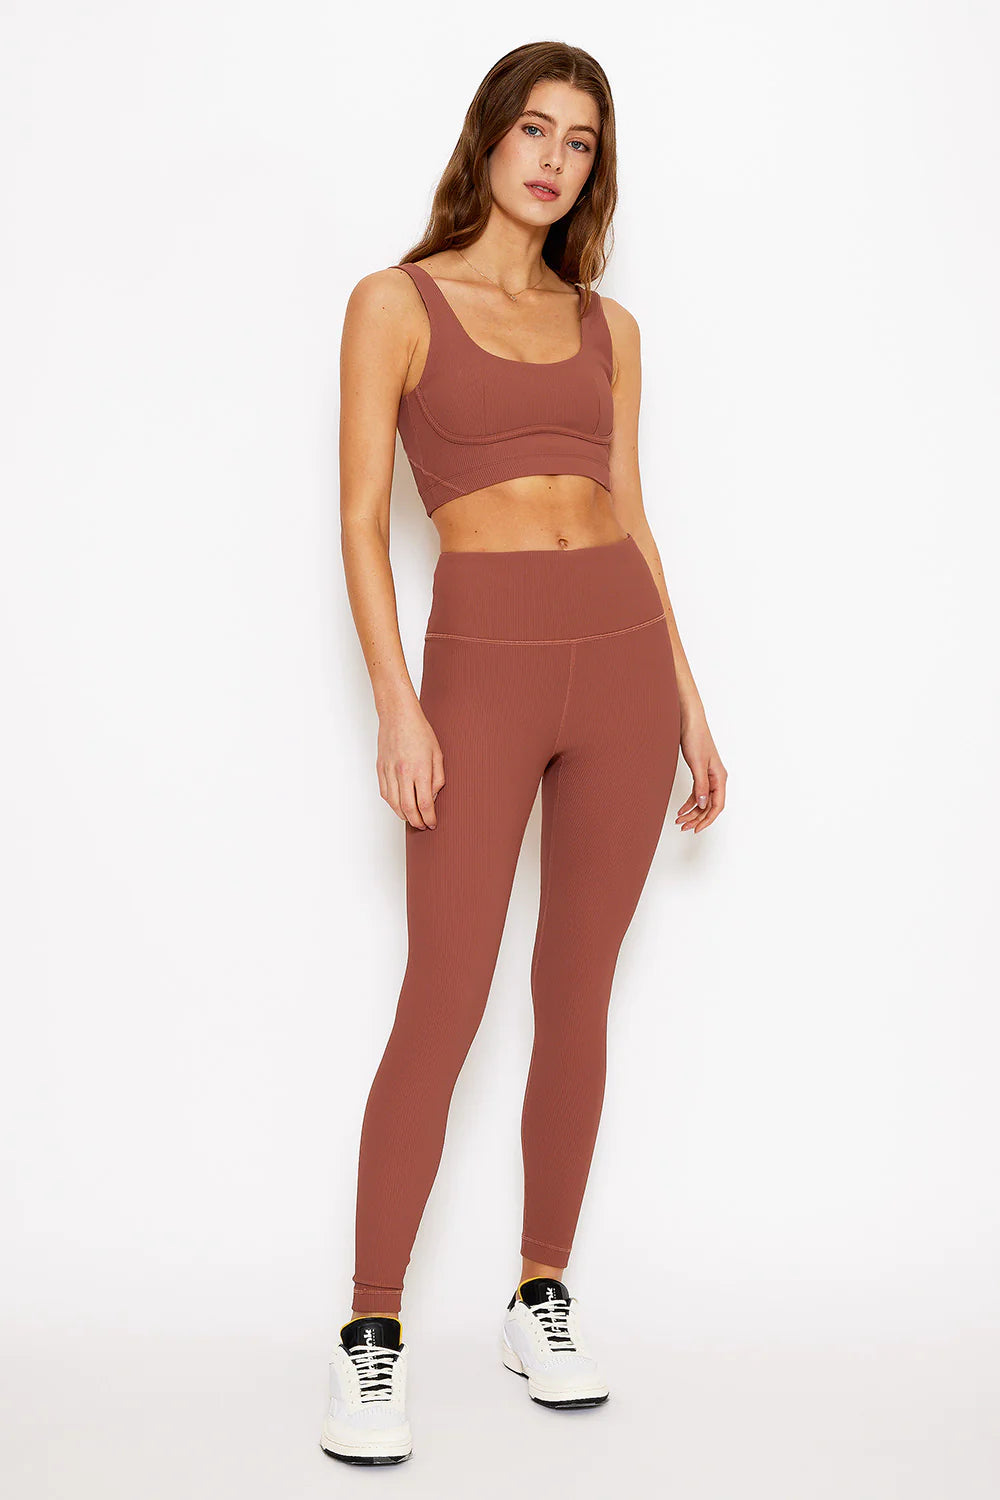 Rose Taupe Nancy Ribbed Leggings – Finley's Boutique